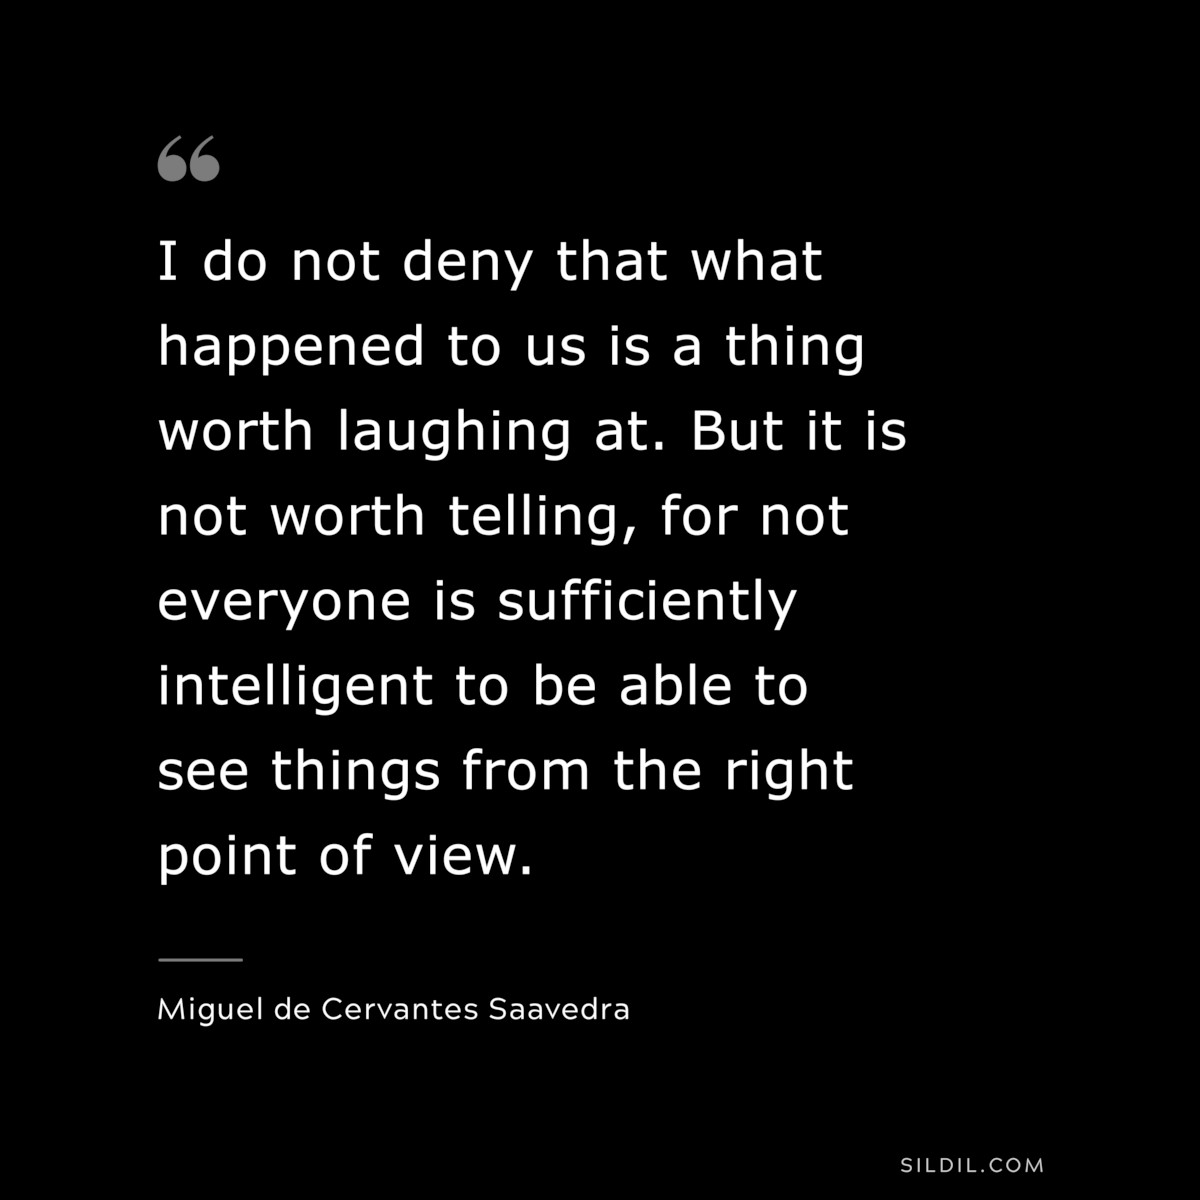 I do not deny that what happened to us is a thing worth laughing at. But it is not worth telling, for not everyone is sufficiently intelligent to be able to see things from the right point of view. ― Miguel de Cervantes Saavedra